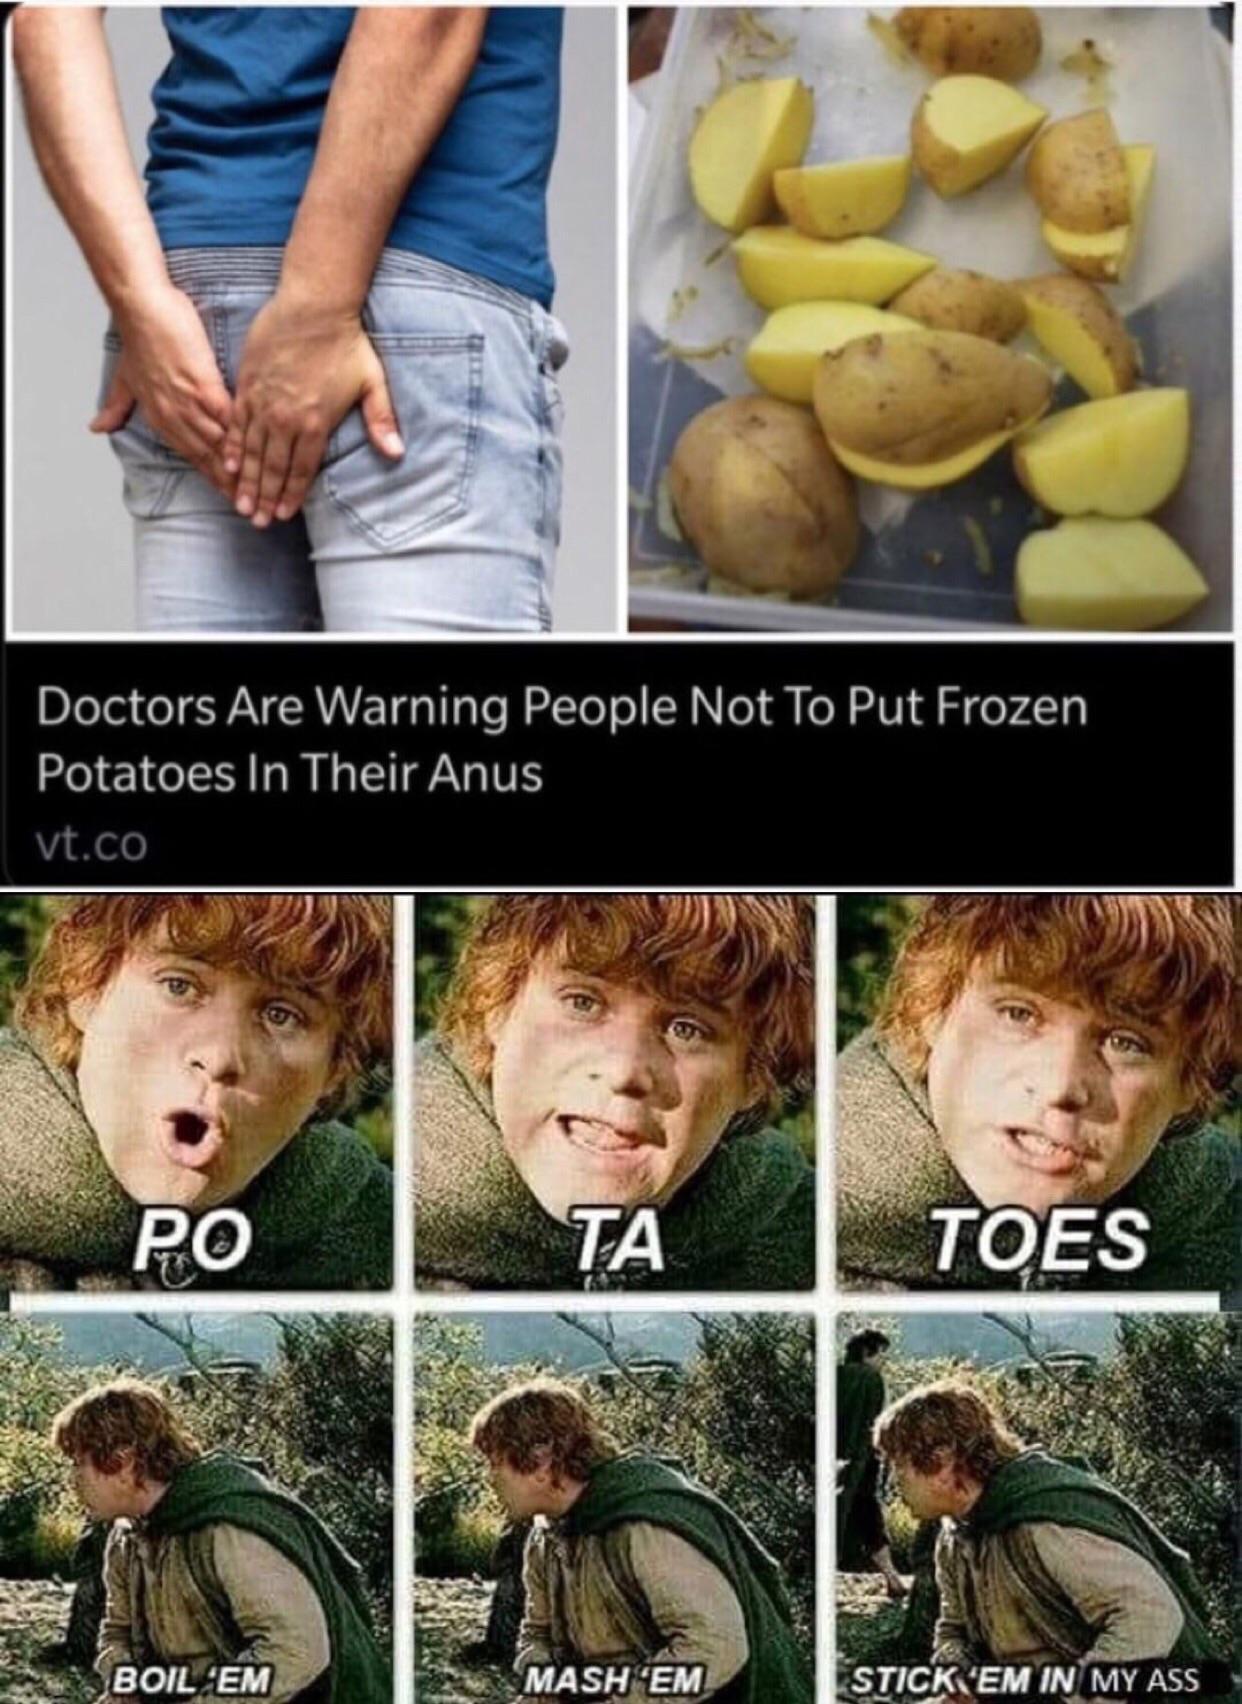 potatoes boil em mash em stick em - Doctors Are Warning People Not To Put Frozen Potatoes In Their Anus vt.co Ta Toes Boil 'Em Mash Em Stick 'Em In My Ass